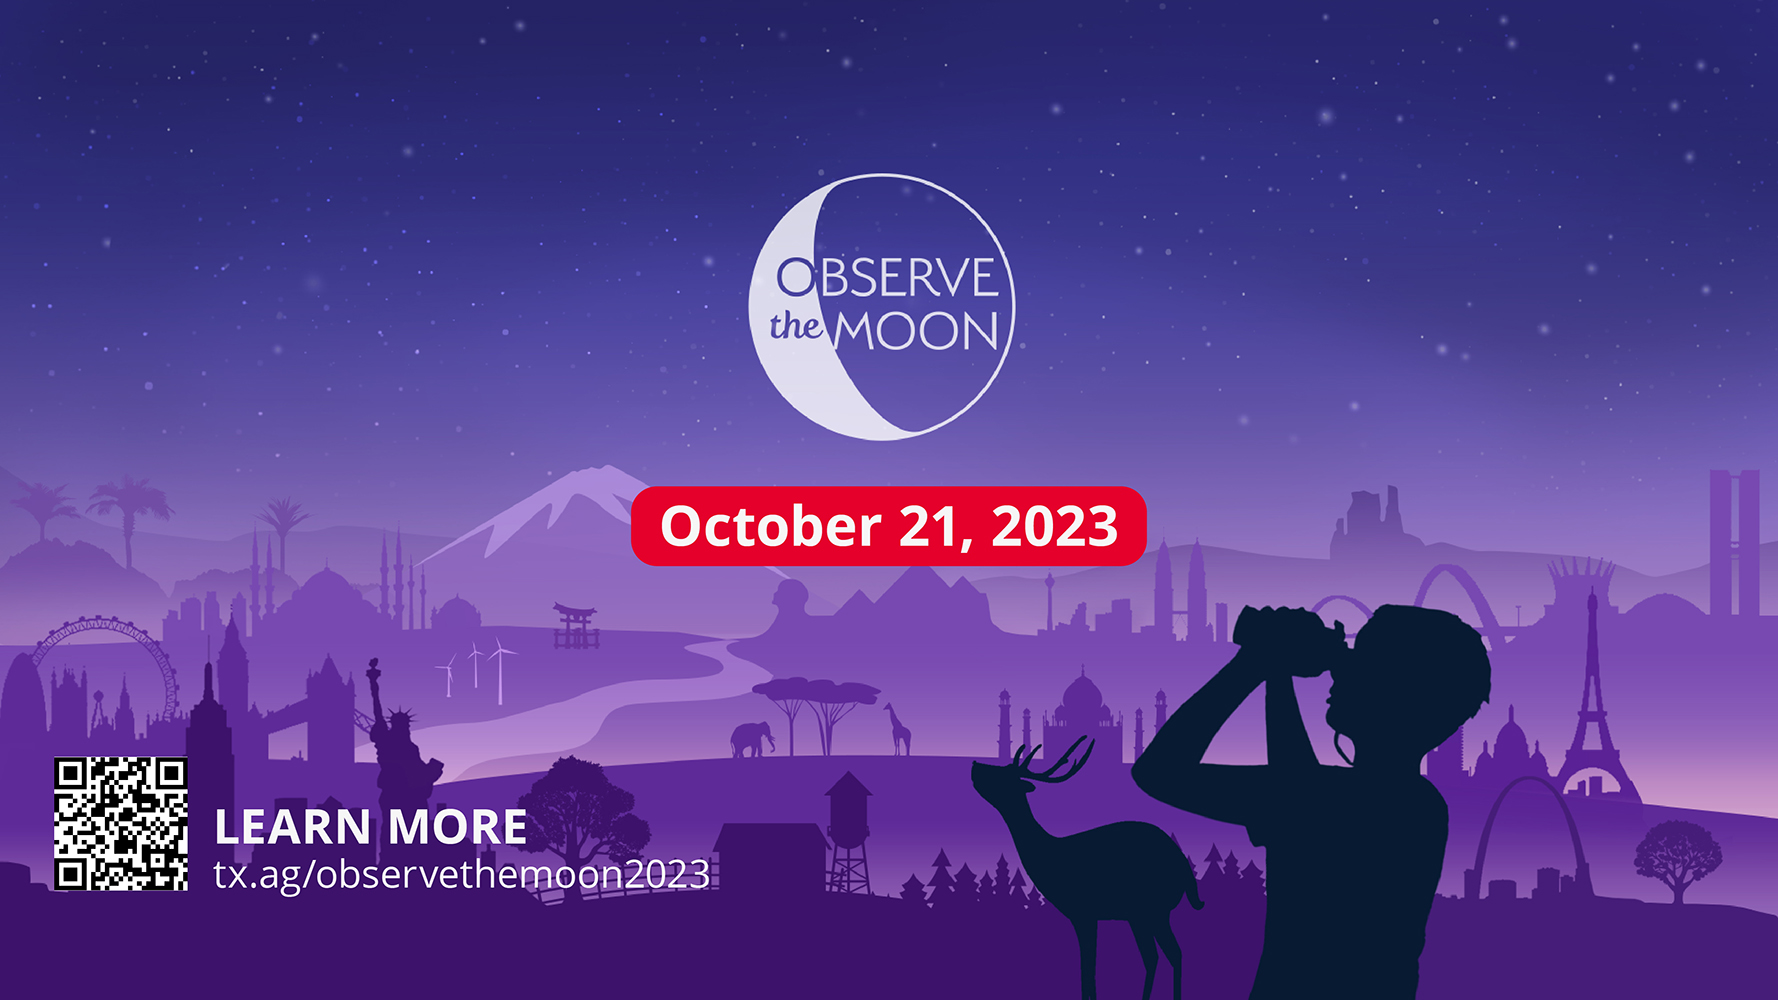 Graphic promoting International Observe the Moon Night 2023